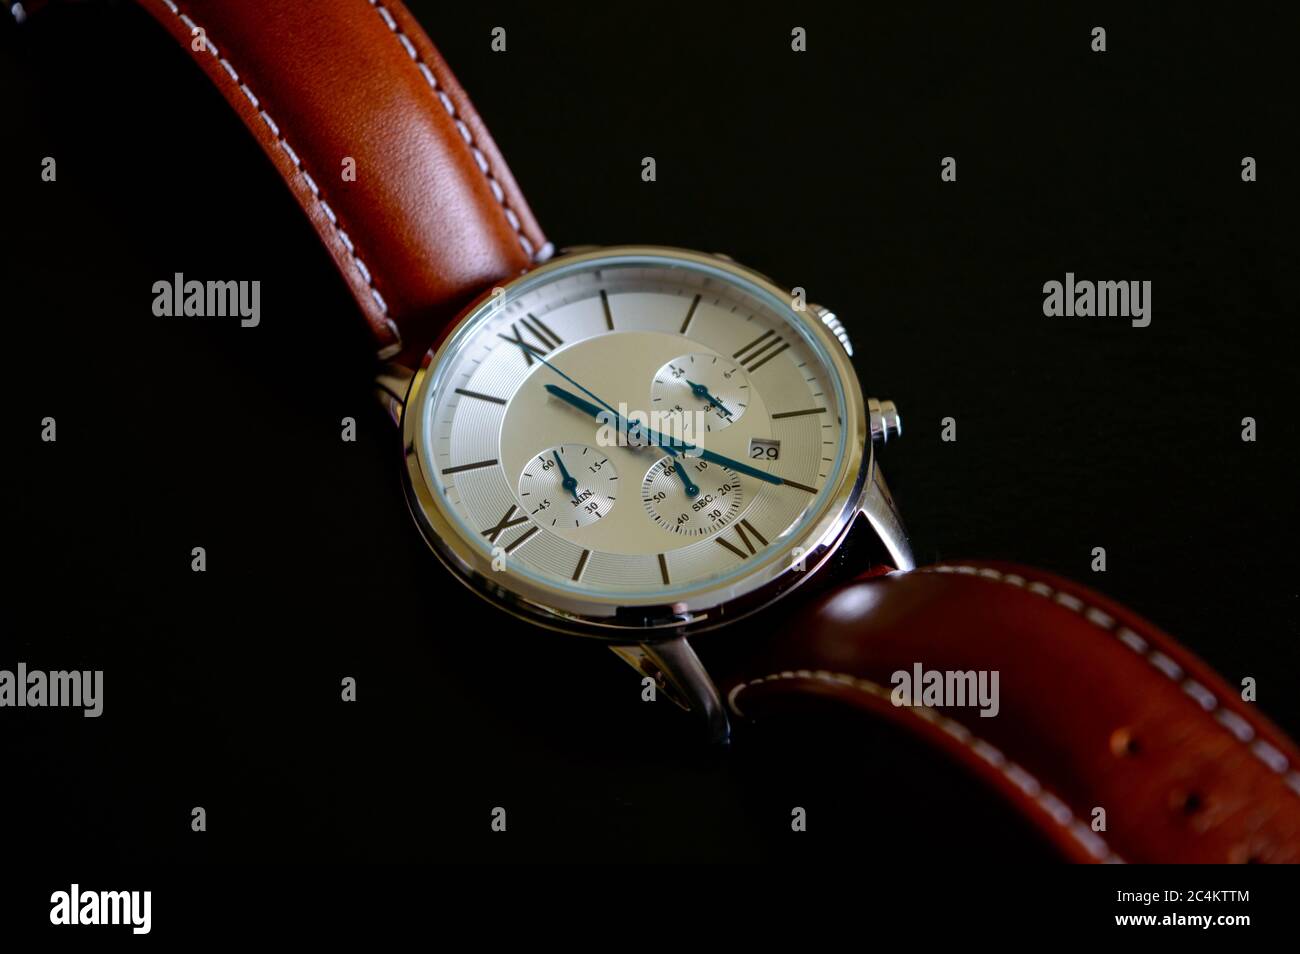 Nice luxury man's wrist watch with blue clock hands and brown leather ...